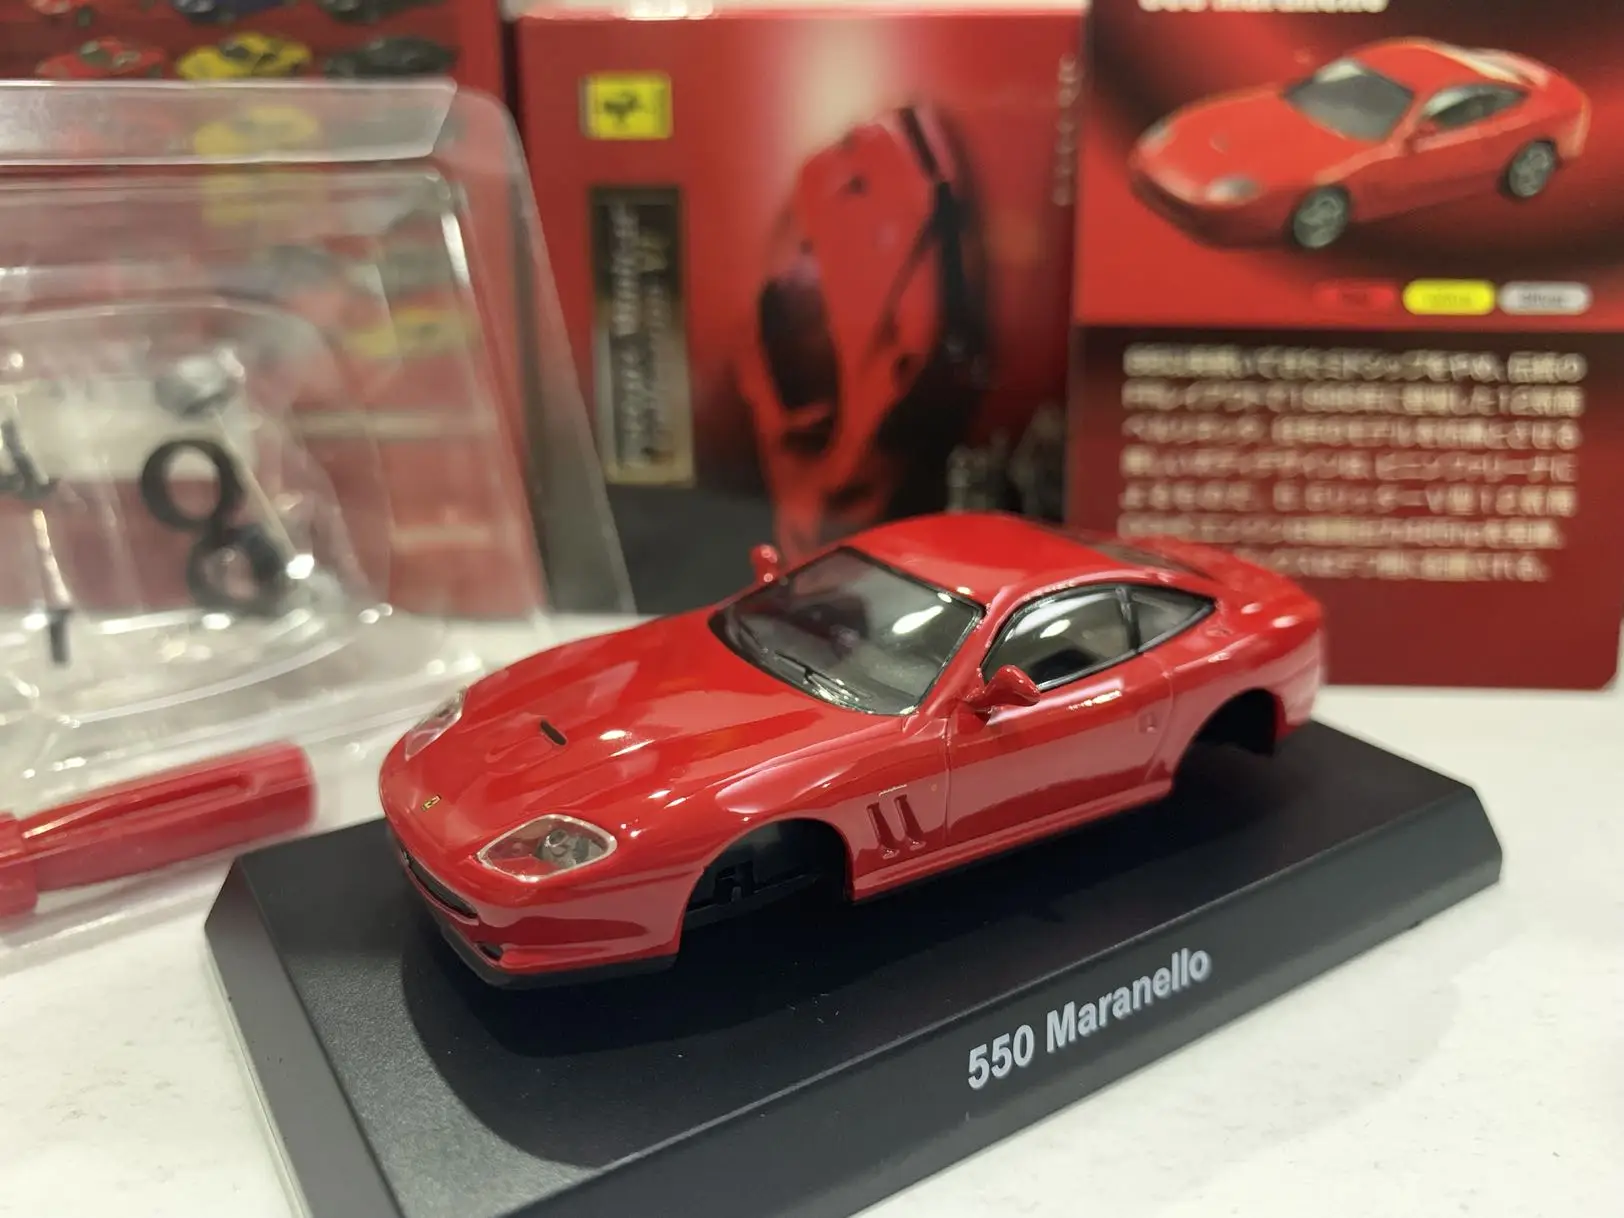 

1/64 KYOSHO FERRARI 550 Maranello Collection of die-cast alloy assembled car decoration model toys